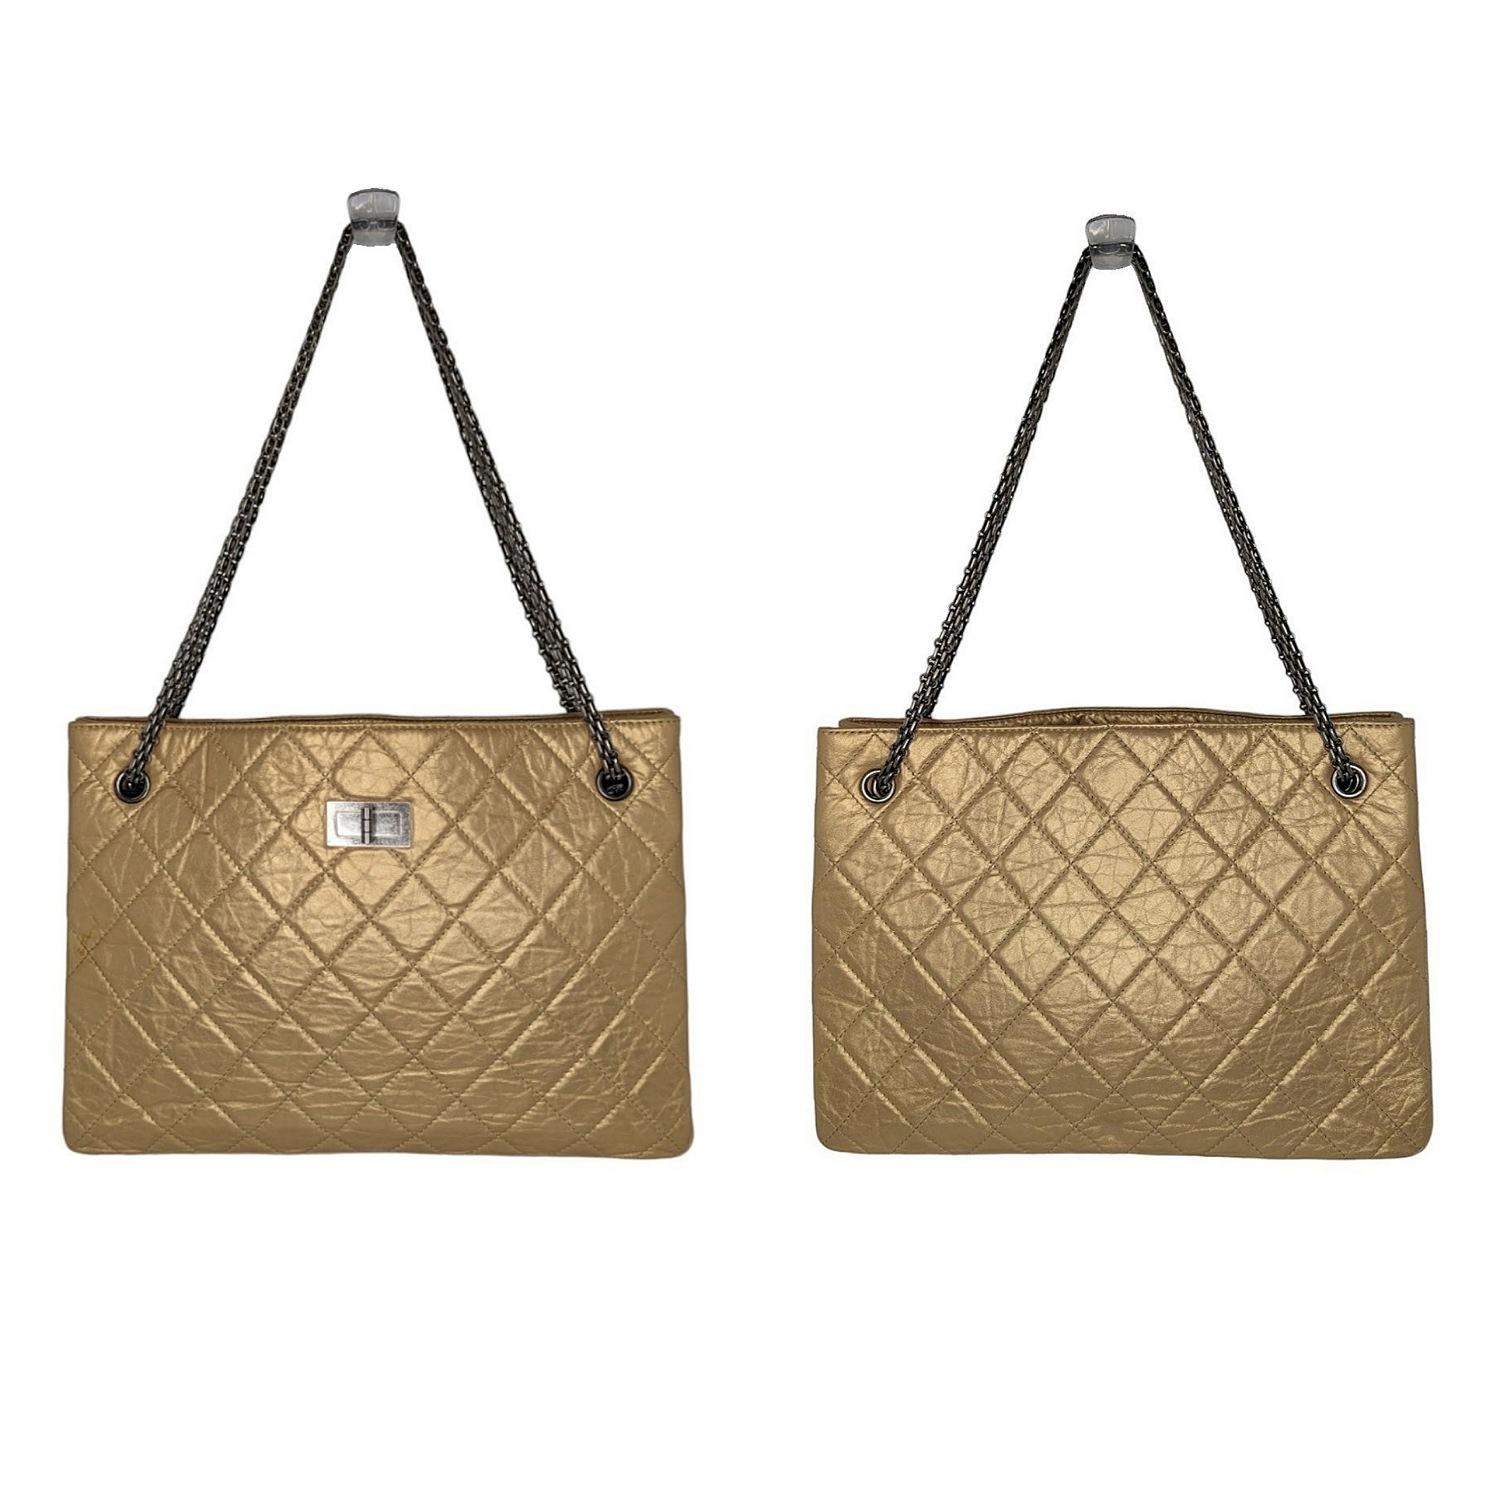 This stunning shoulder bag is crafted of aged and semi-distressed diamond quilted calfskin leather in gold. The bag features ruthenium bijoux chain shoulder straps and a front facing ruthenium squared Mademoiselle turn-lock accent. This opens to a